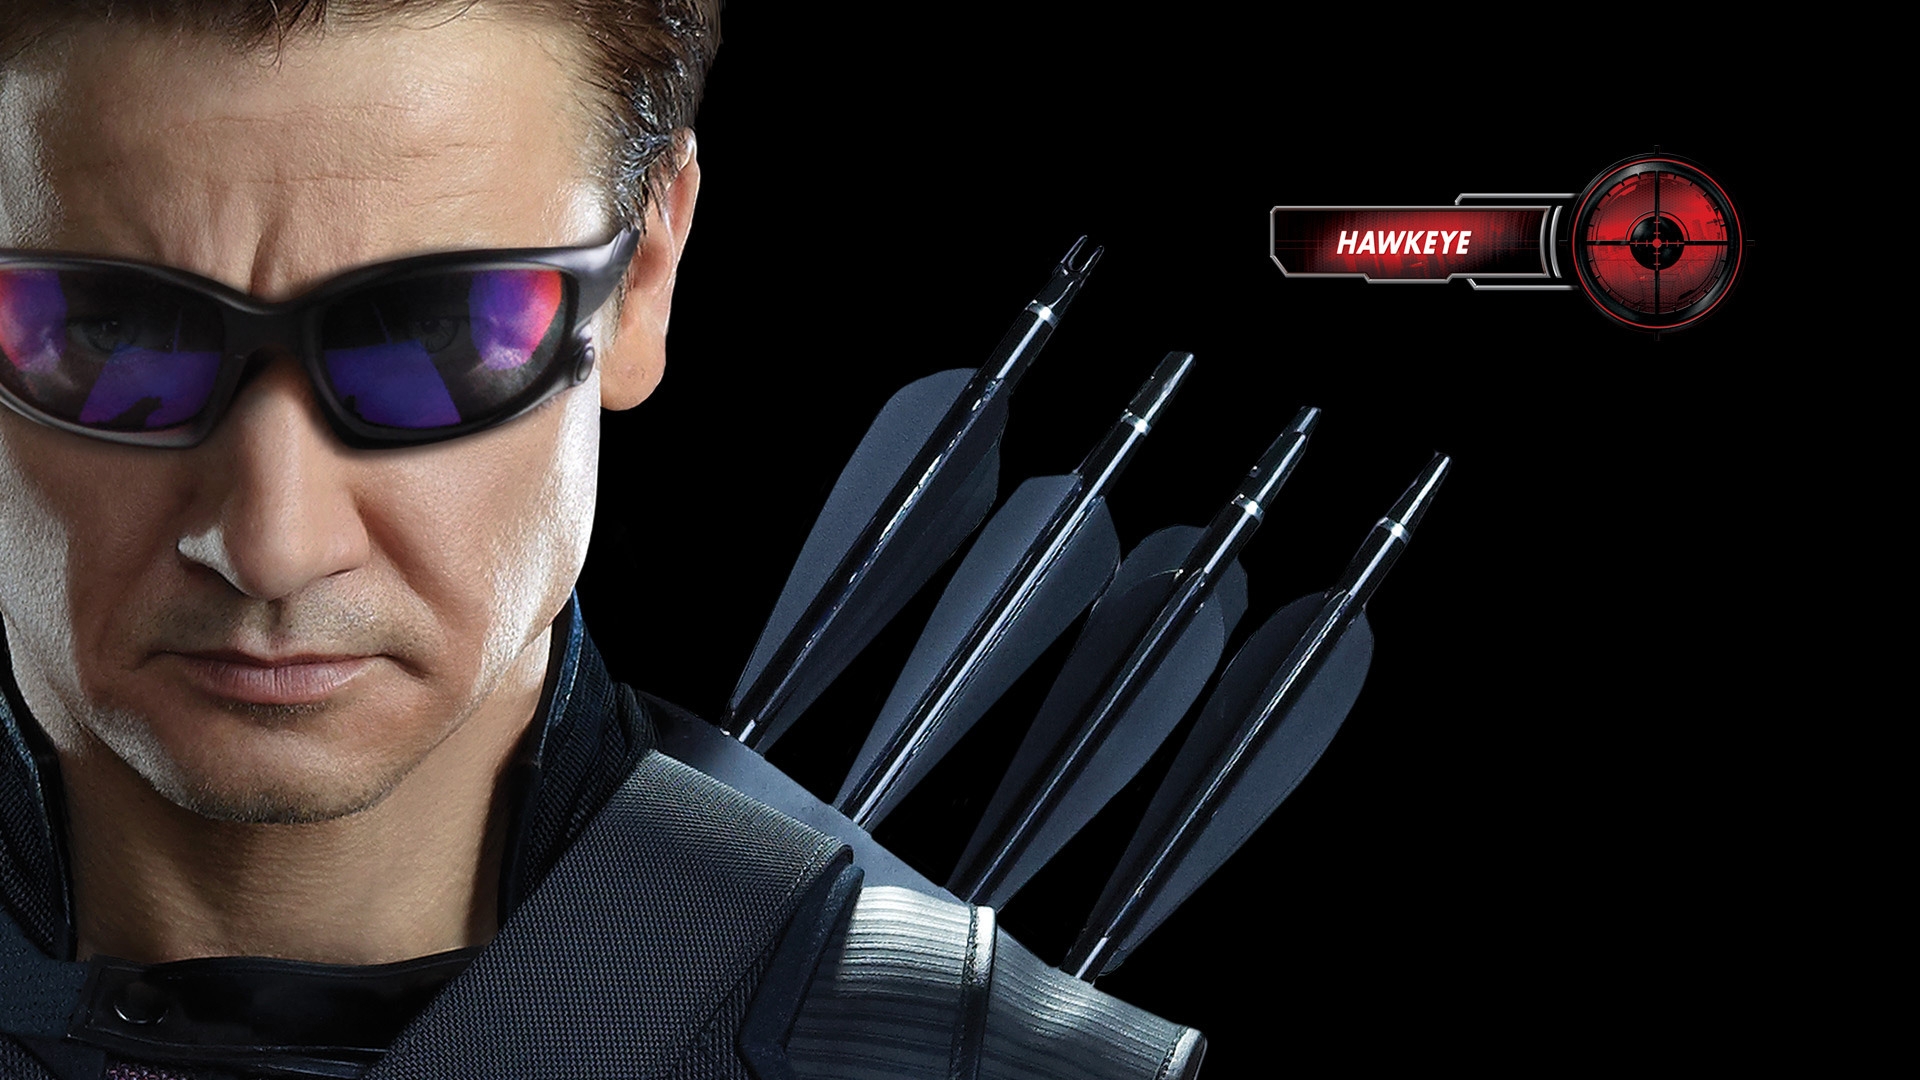 The Avengers Hawkeye for 1920 x 1080 HDTV 1080p resolution